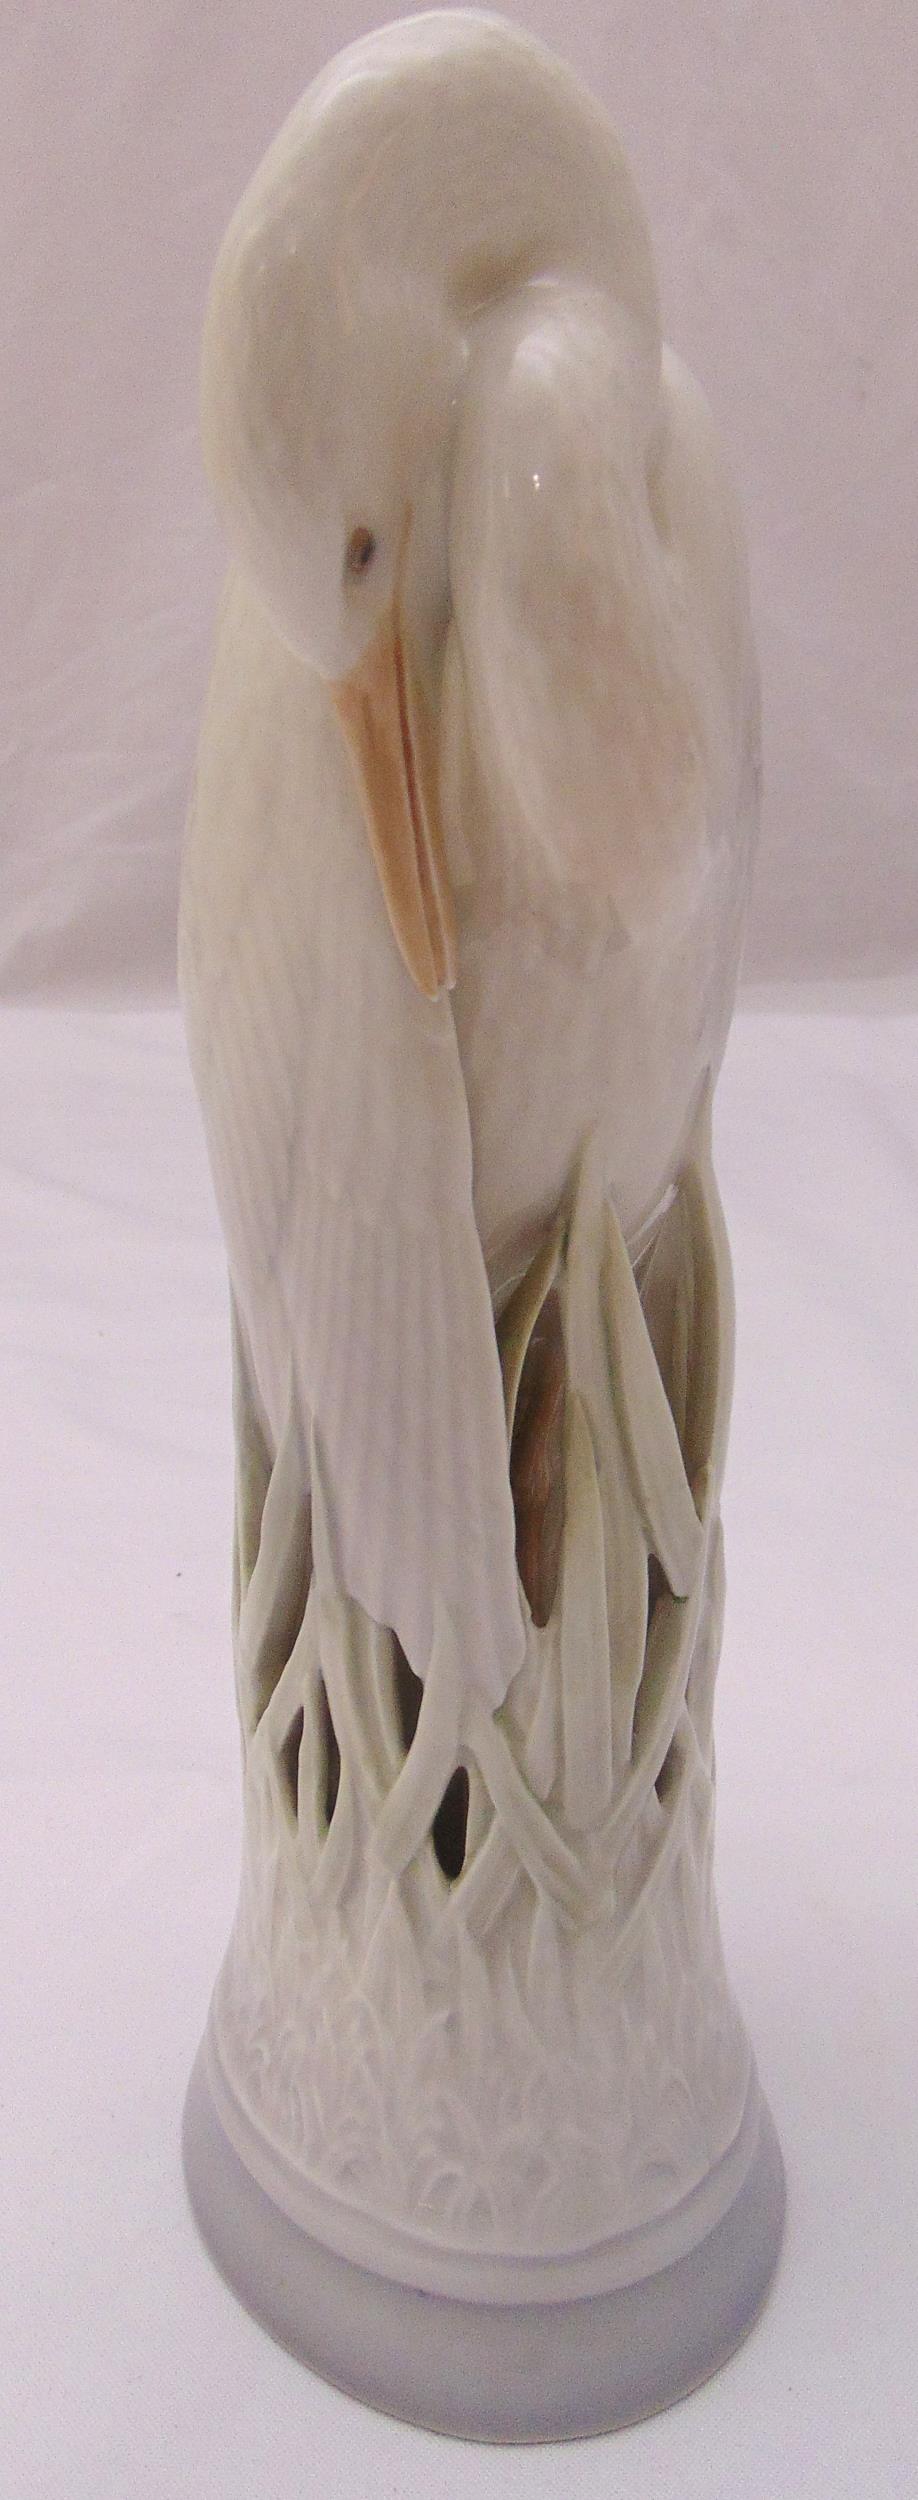 Royal Copenhagen figurine of a heron R3002, marks to the base, 28.5cm (h)